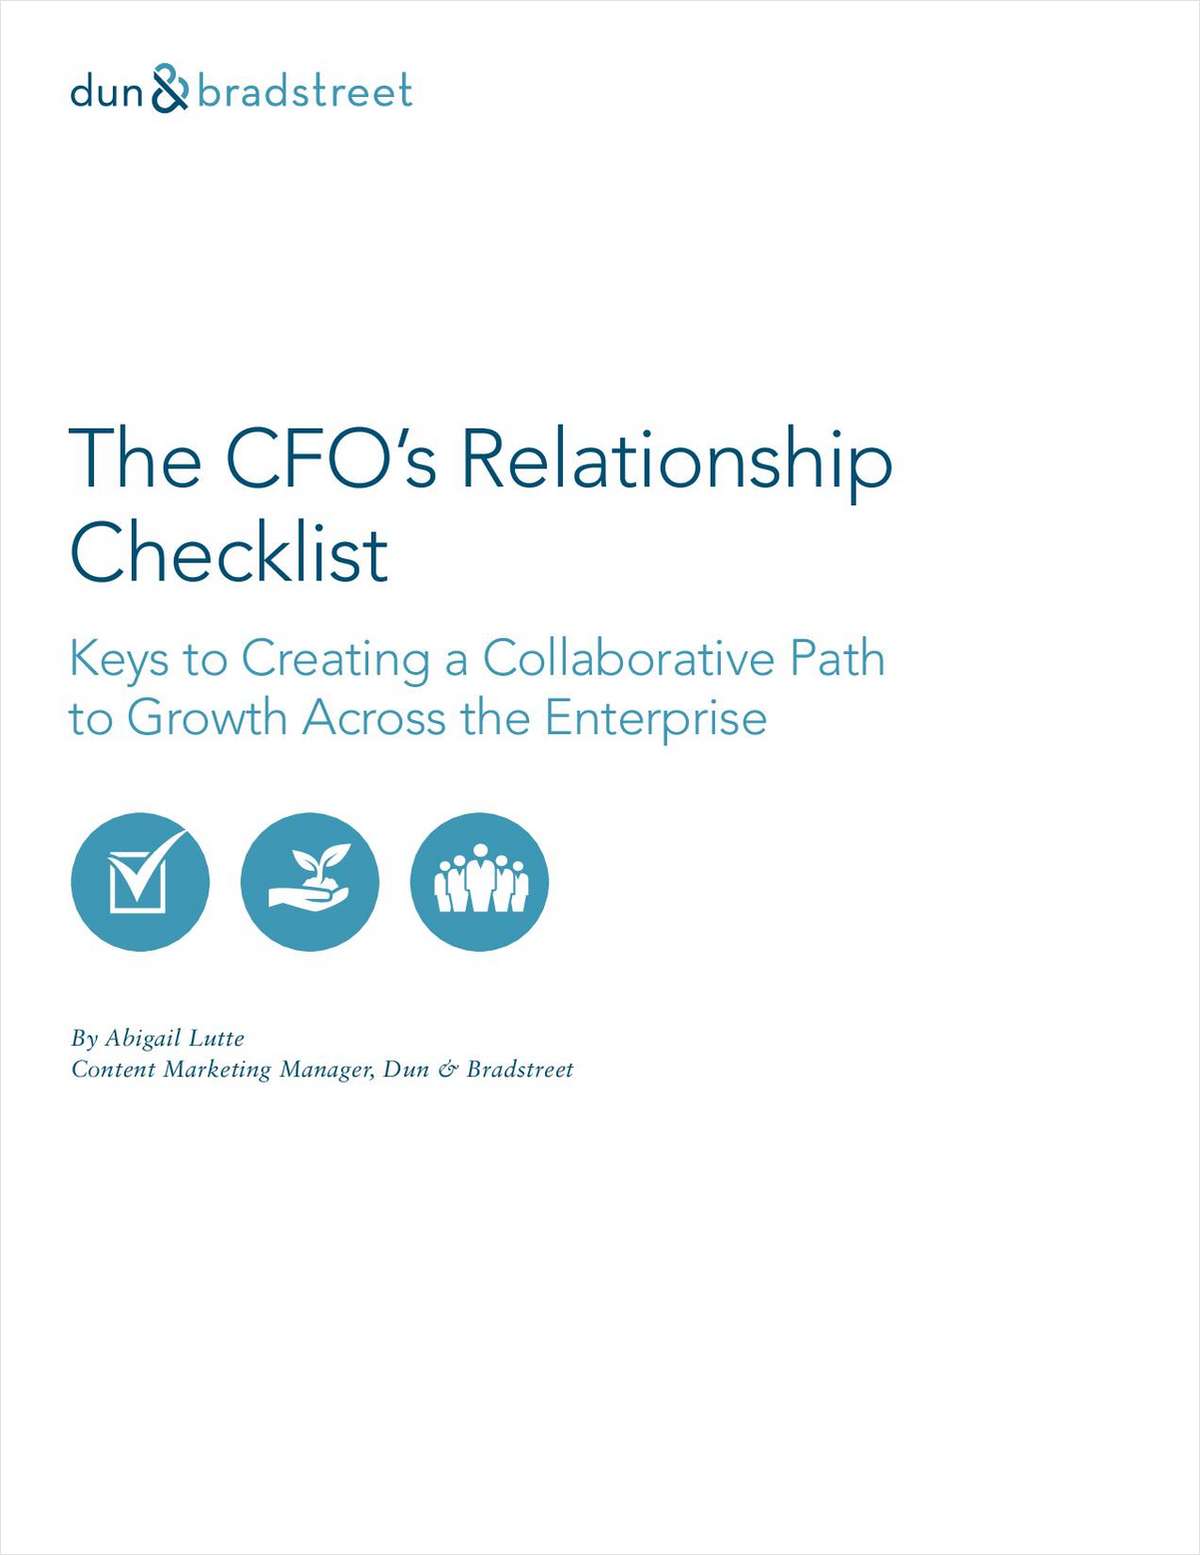 Finance's Path to Collaborative Growth